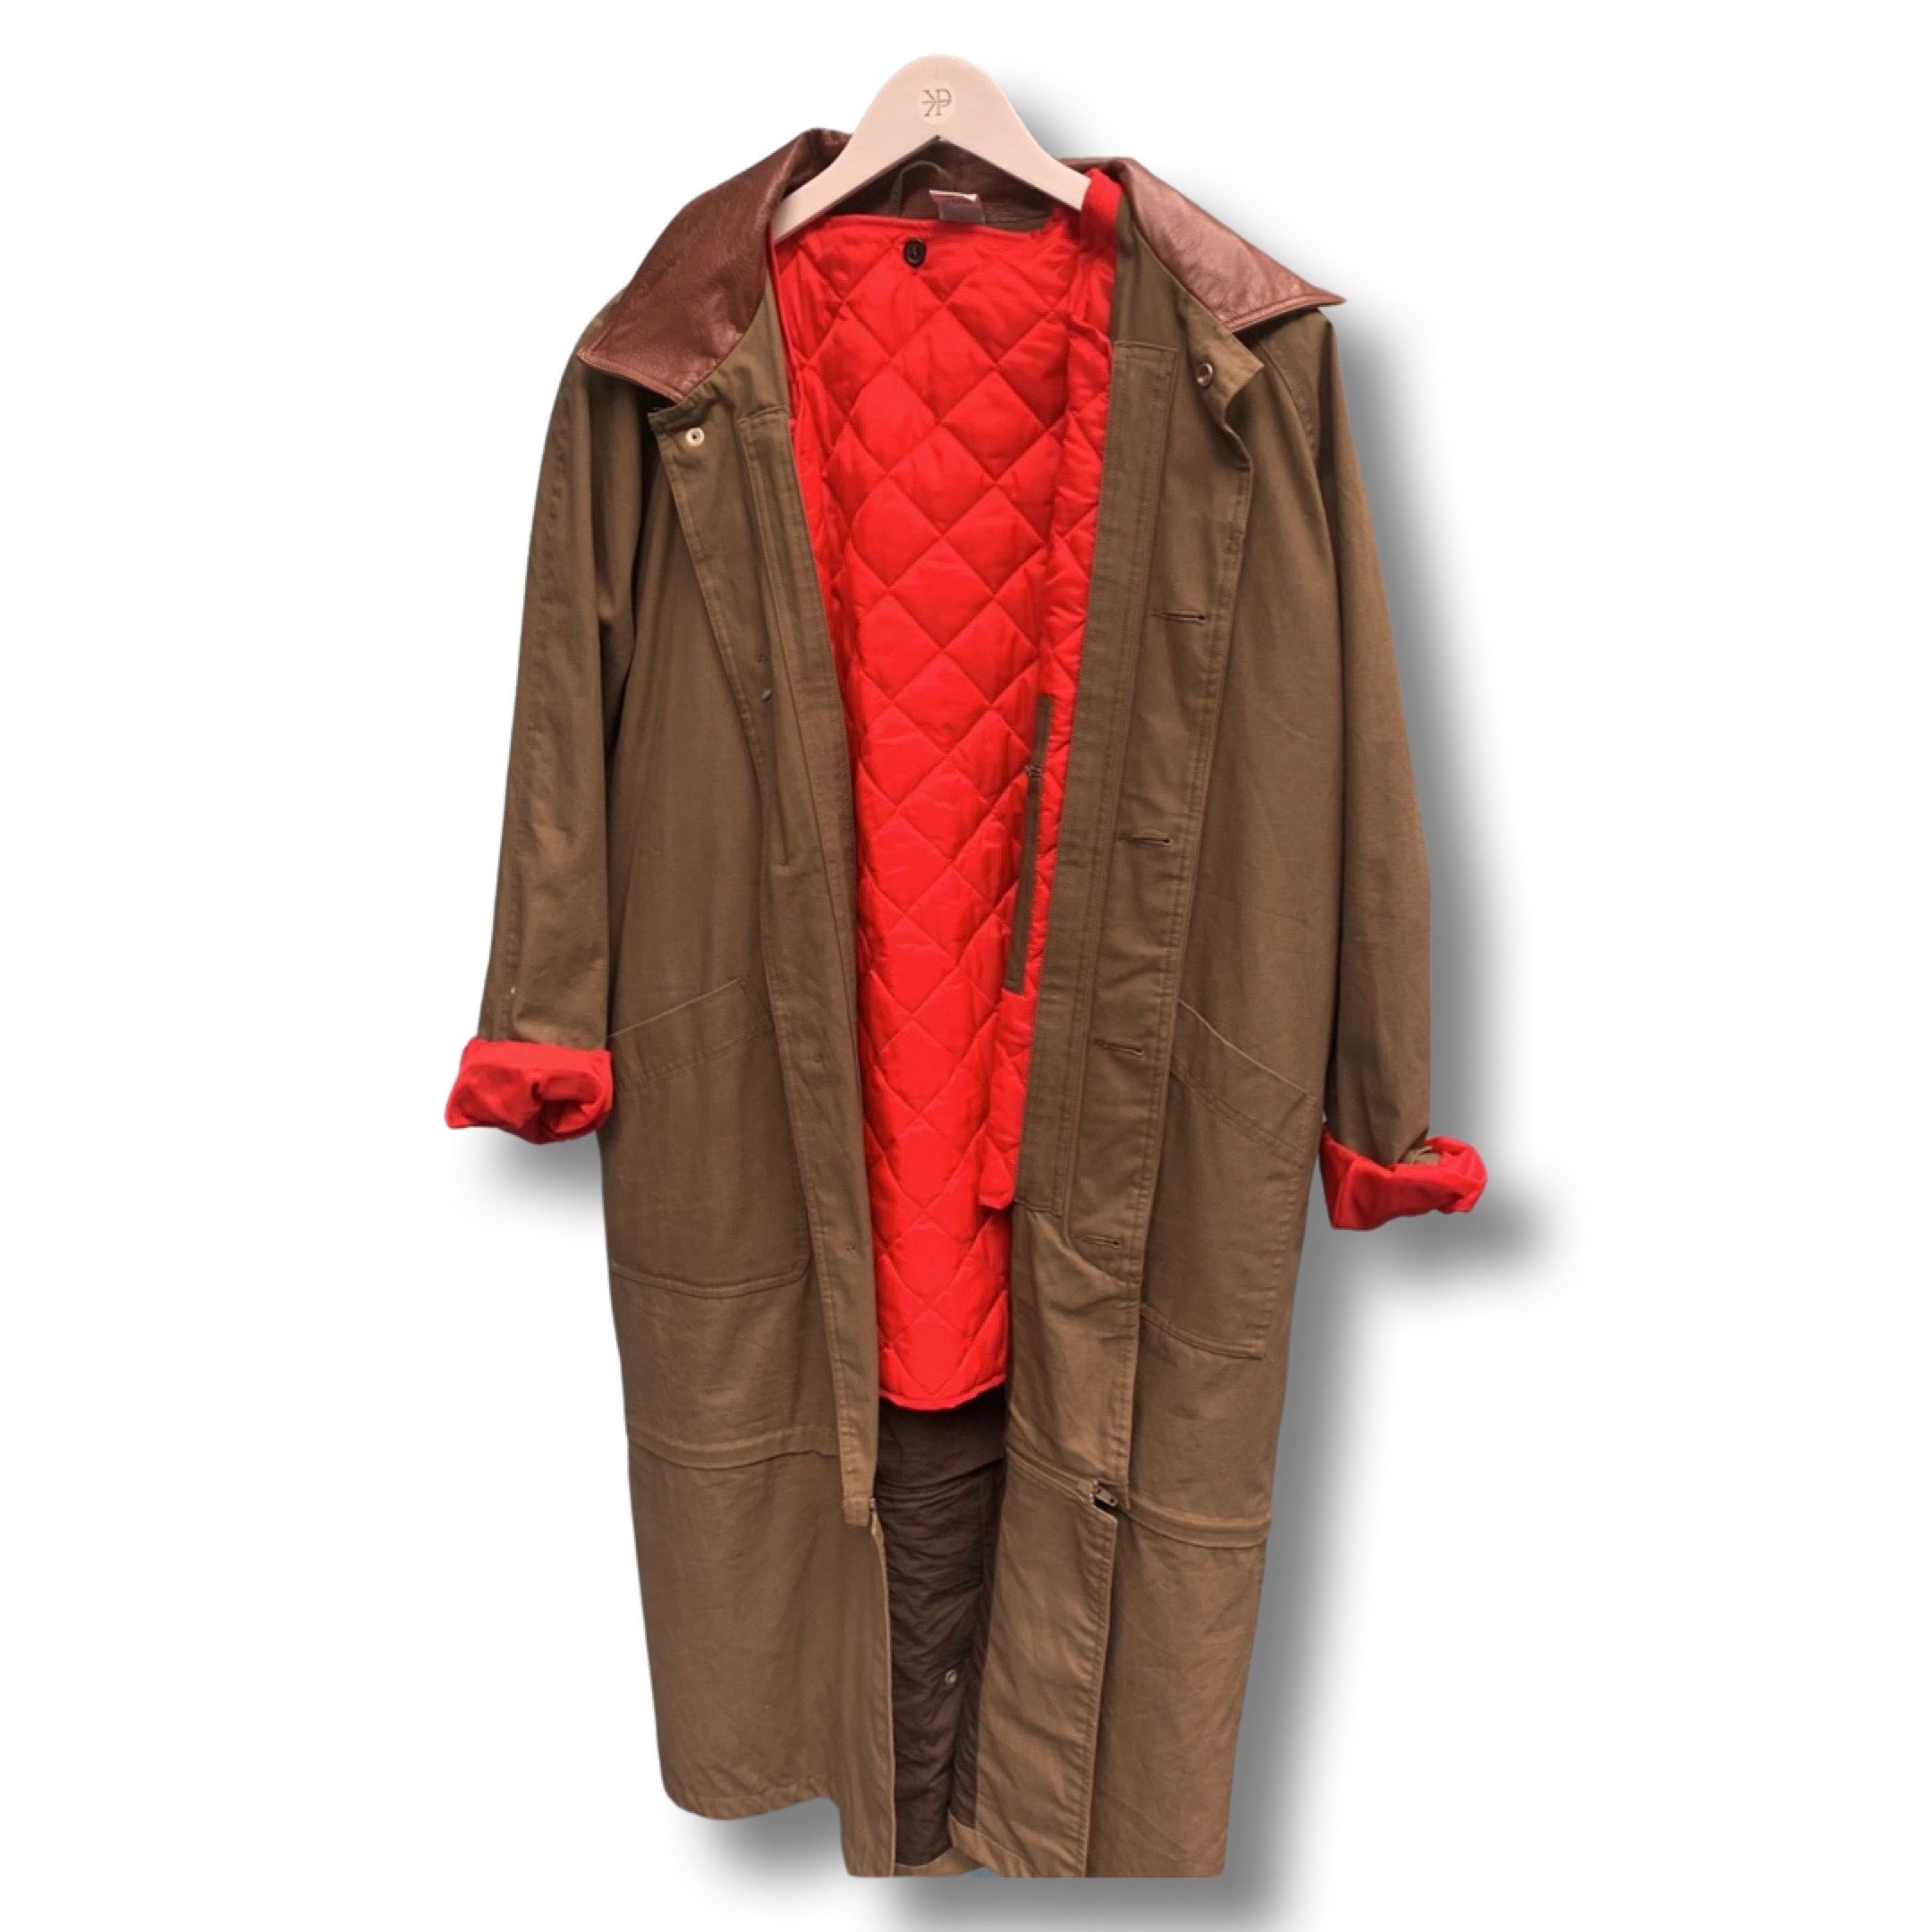 Long khaki brown vintage coat with quilted inner red jacket.